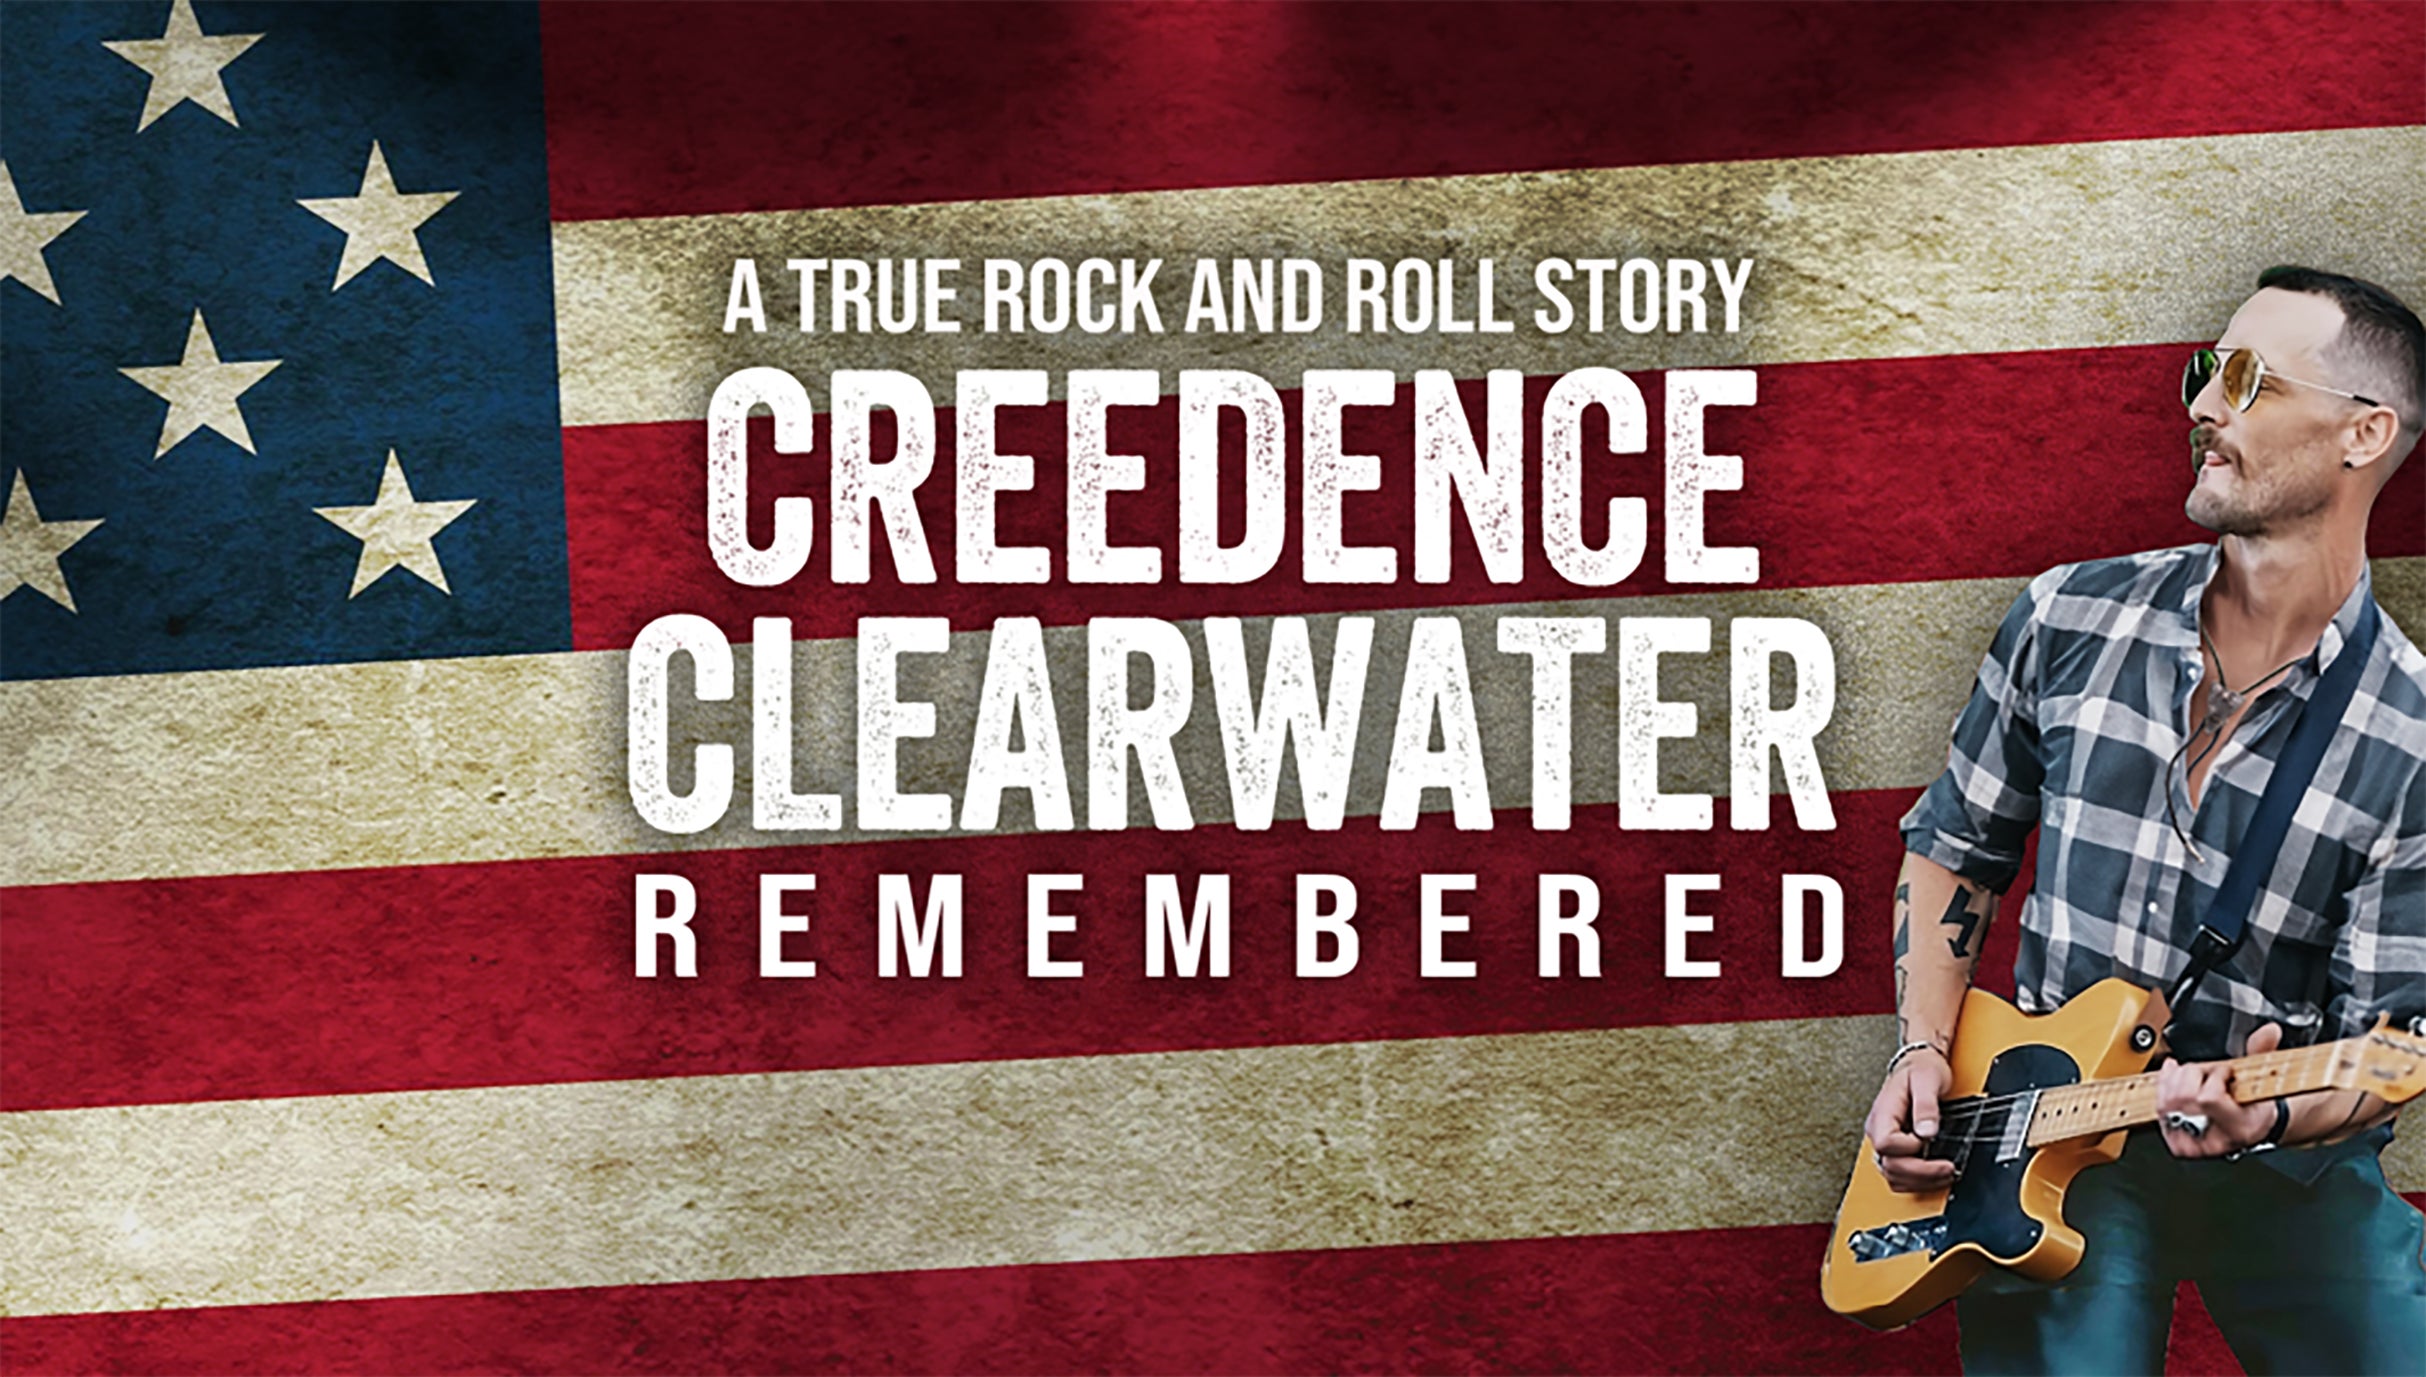 Credence Clearwater Remembered - A True Rock and Roll Story presales in Calgary